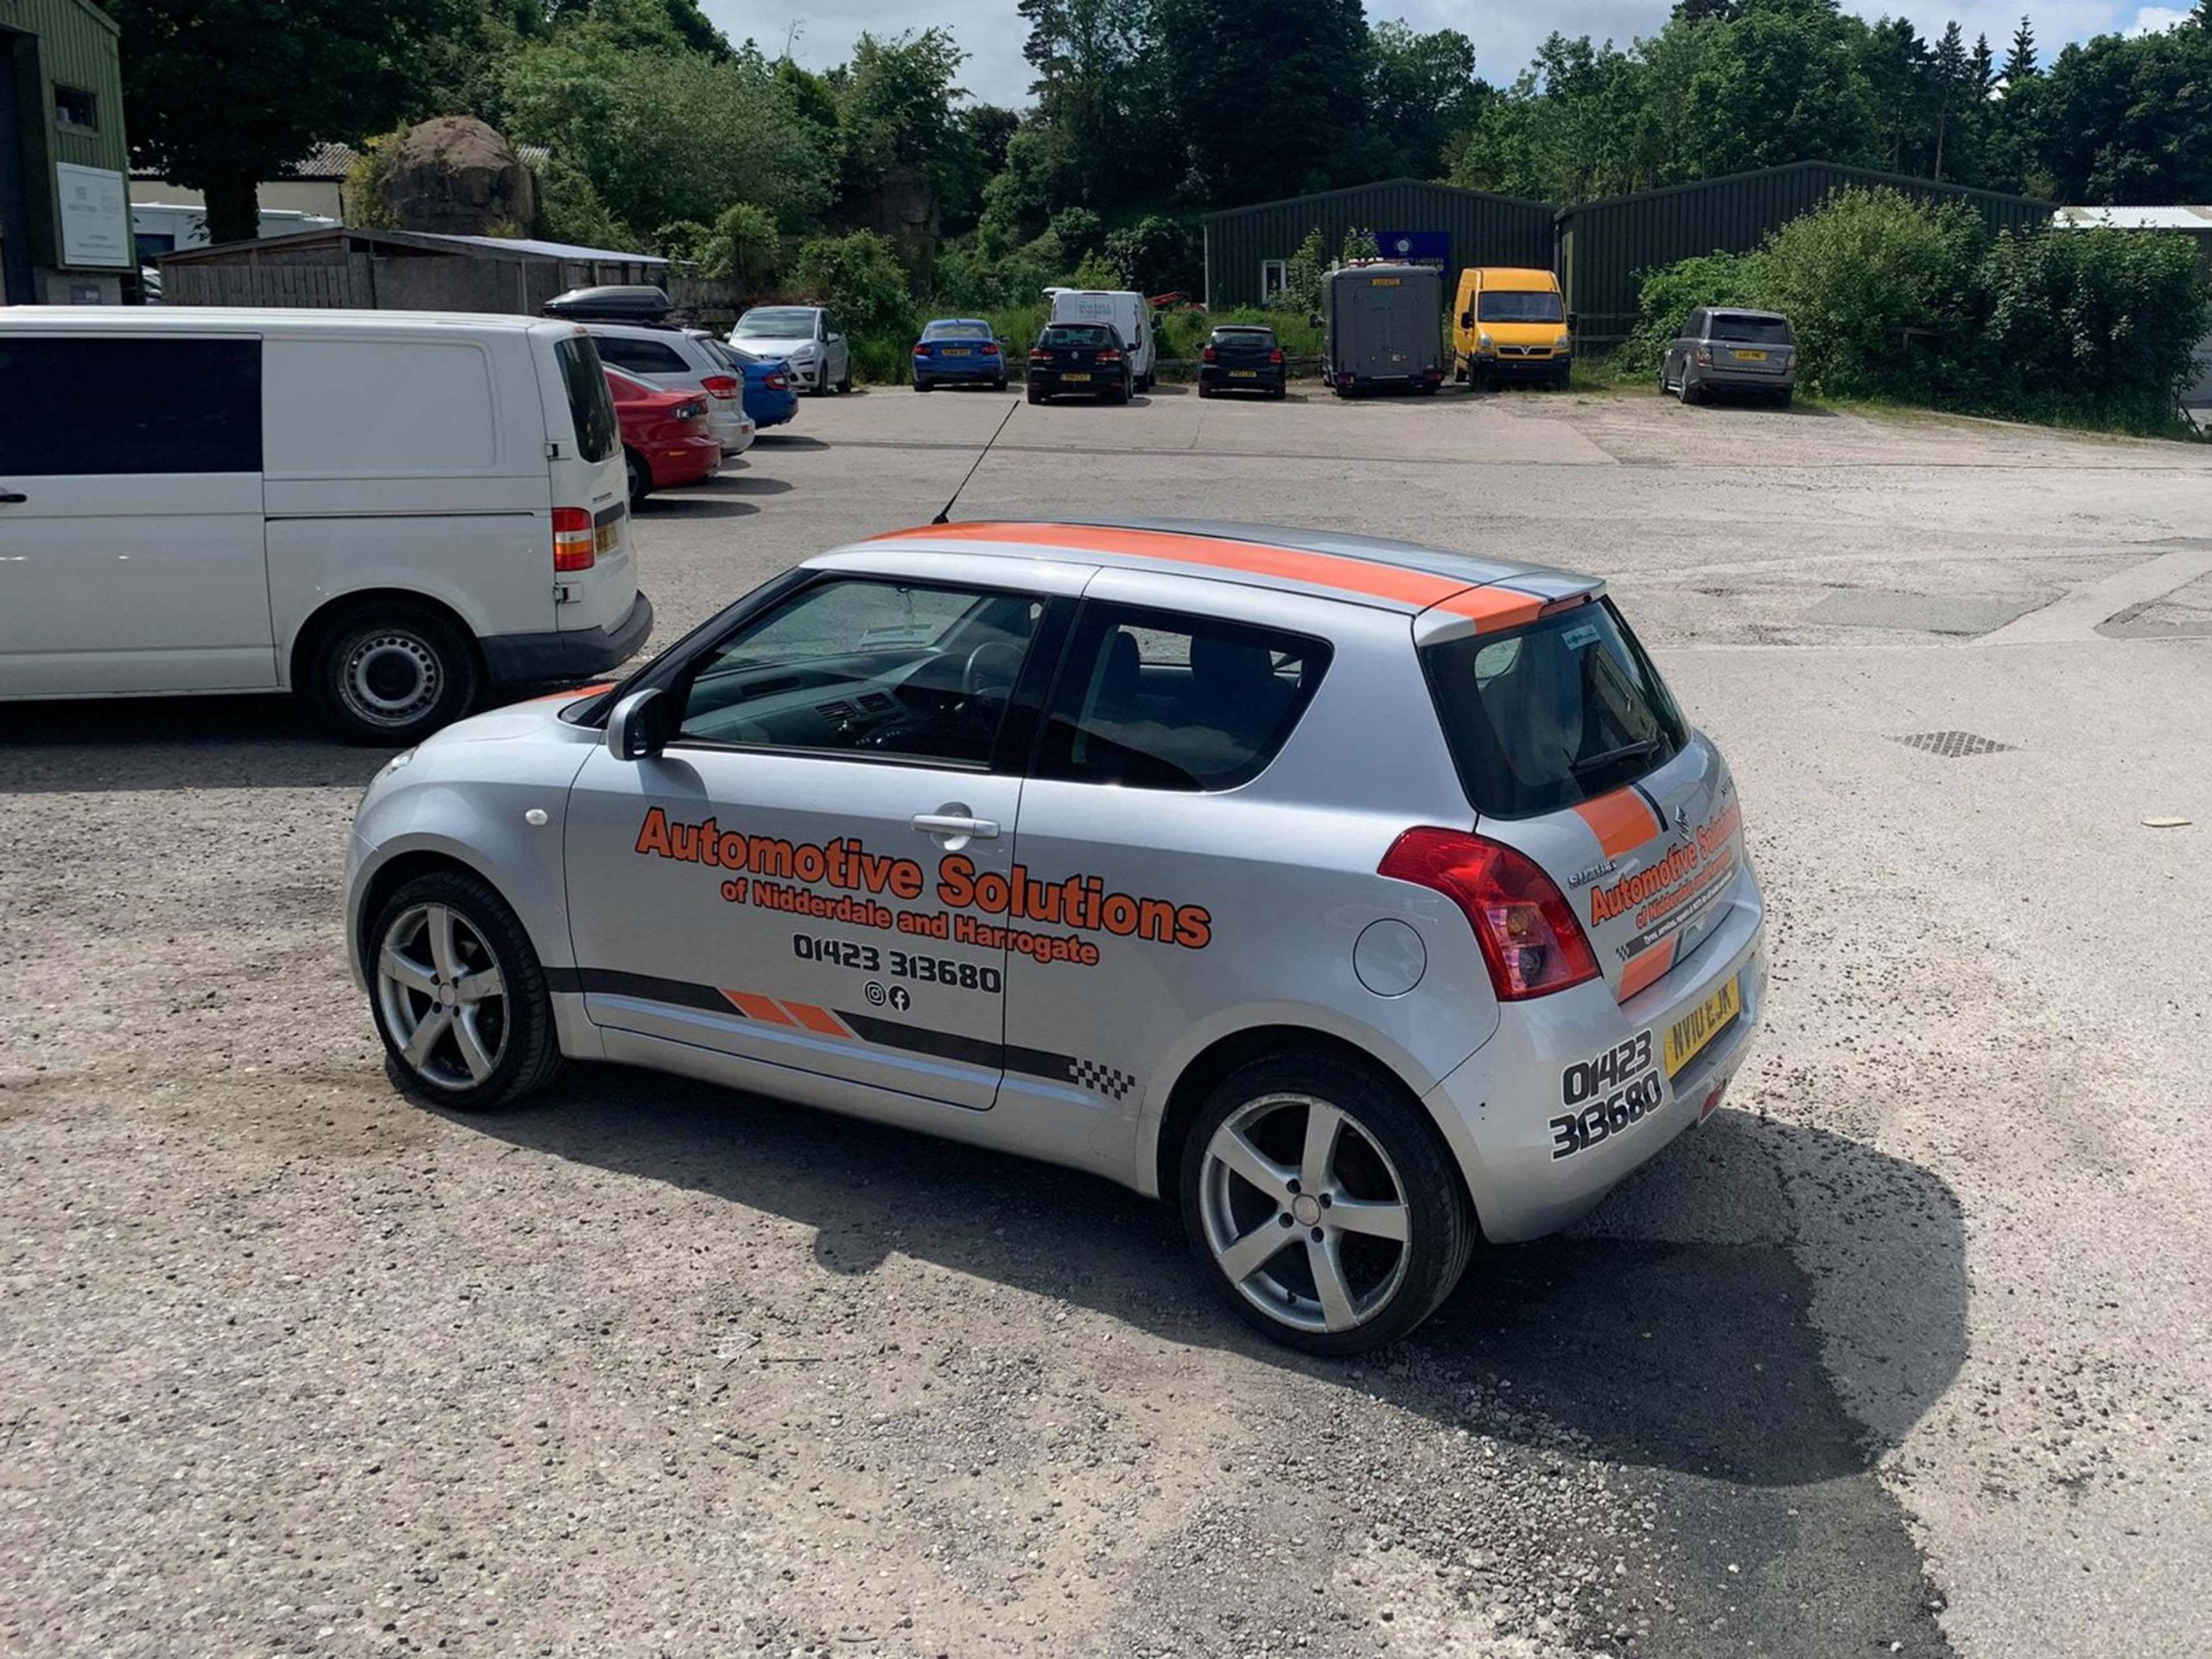 Automotive Solutions of Nidderdale and Harrogate Vehicle Livery